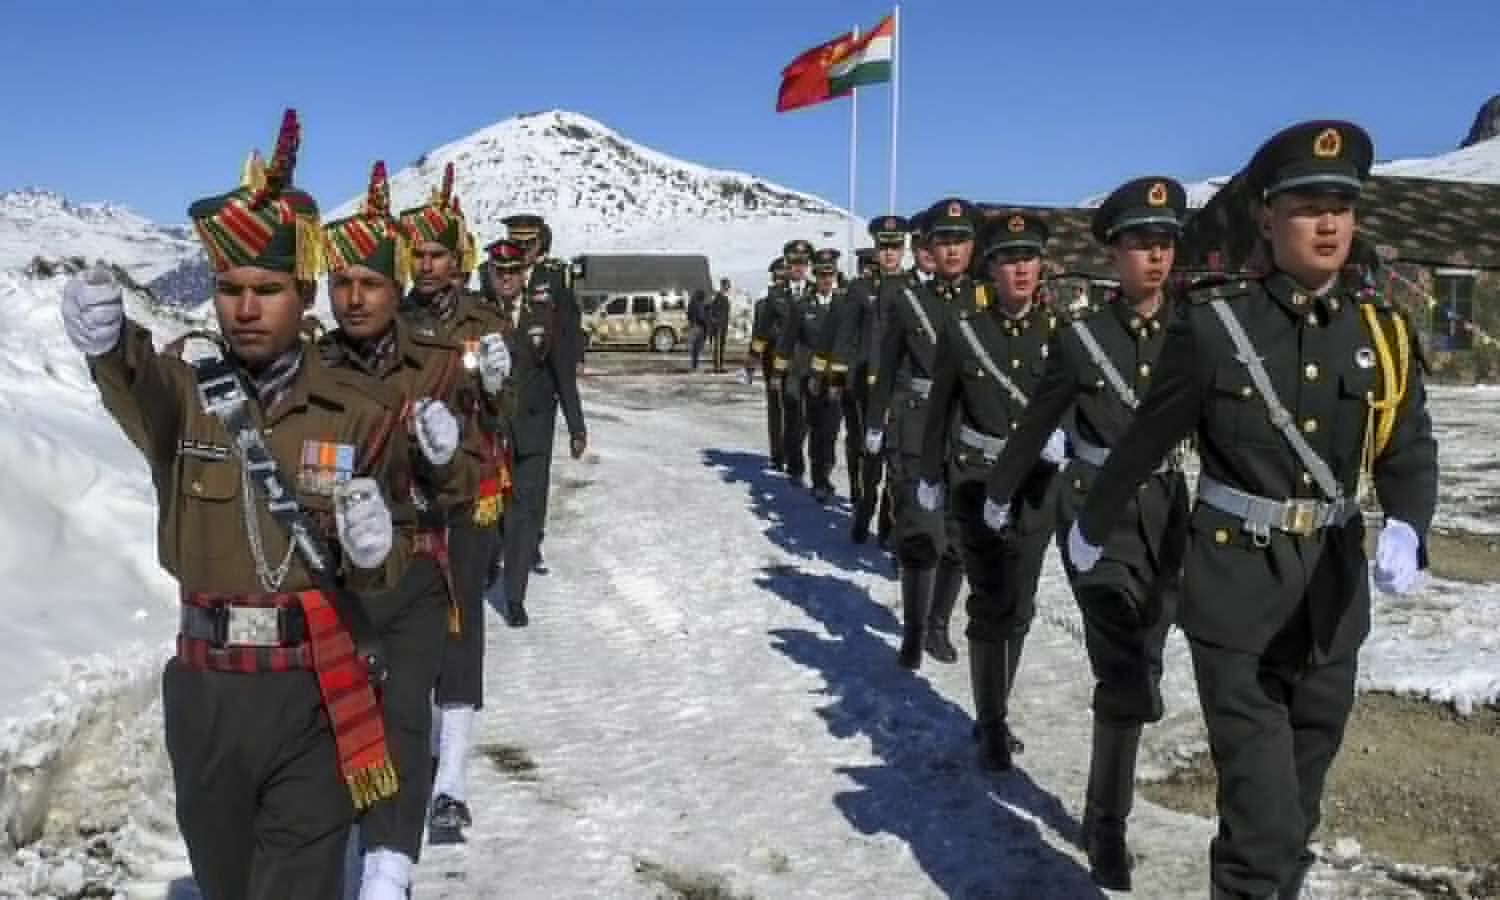 Indo-China Tension: China’s provocative action in Ladakh amid tension with Taiwan, India warns